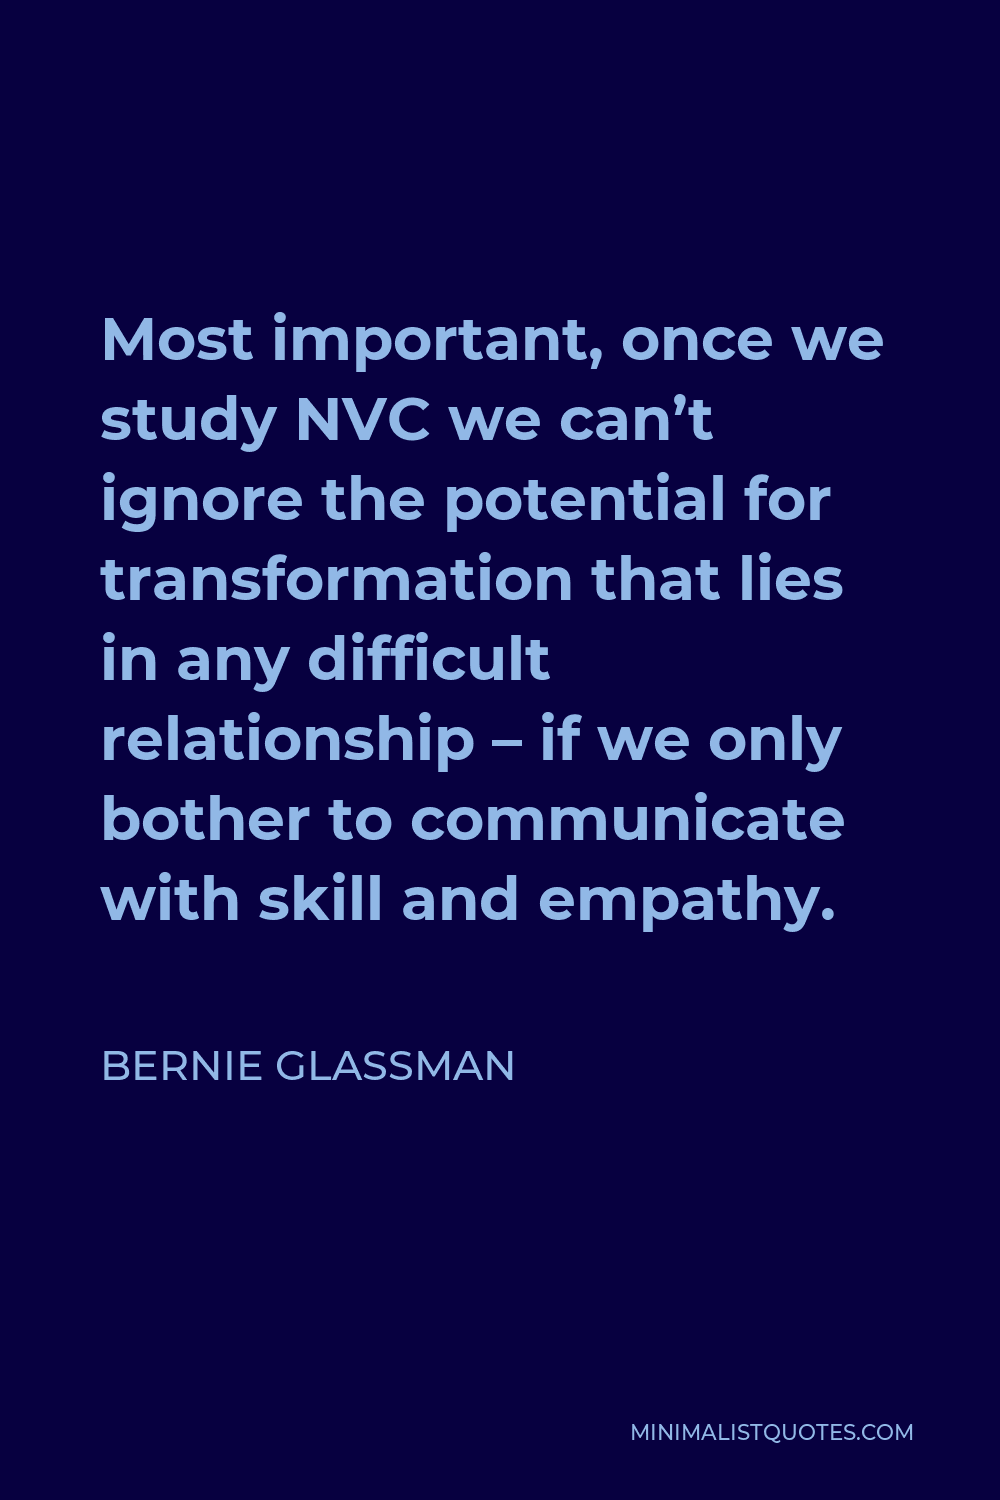 Bernie Glassman Quote - Most important, once we study NVC we can’t ignore the potential for transformation that lies in any difficult relationship – if we only bother to communicate with skill and empathy.